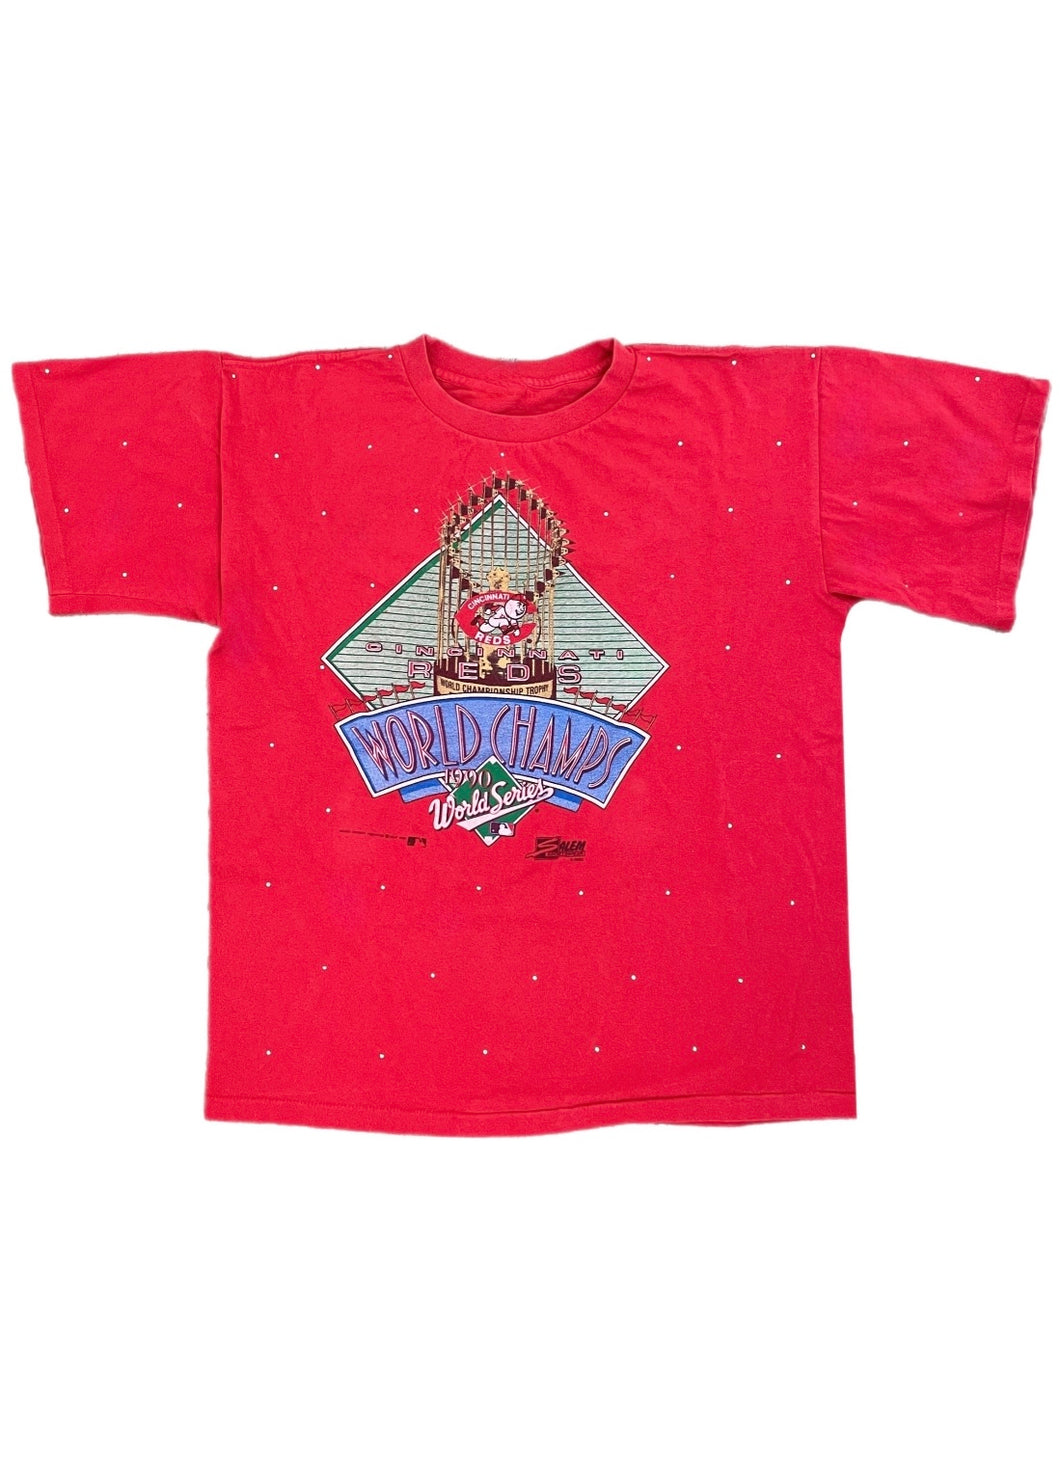 Cincinnati Reds, MLB One of a KIND Vintage Tee with All Over Crystal Design.